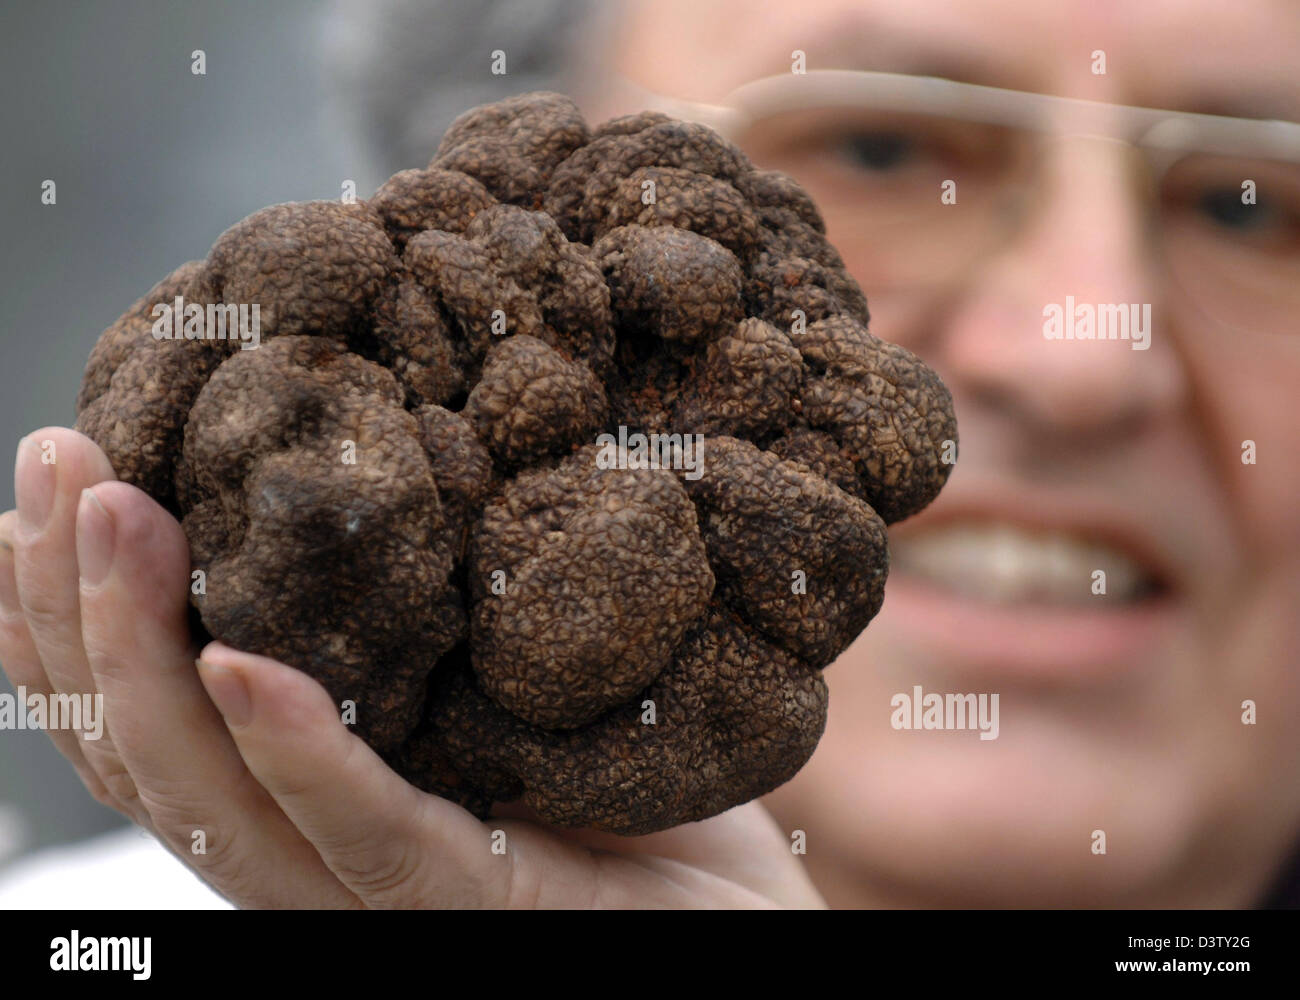 Horst Danner presents a giant black truffel at the airport of Munich, Germany, Thursday, 30 November 2006. The German fungus expert discovered the truffel in China. According to Danner the black truffel (Lat.: Tuber sinense) weighs exactly 1.098 kilograms. The normal weight of a truffel is between 10 to 25 grams, the yet biggest truffel is a white 1.31 kilograms specimen found in C Stock Photo